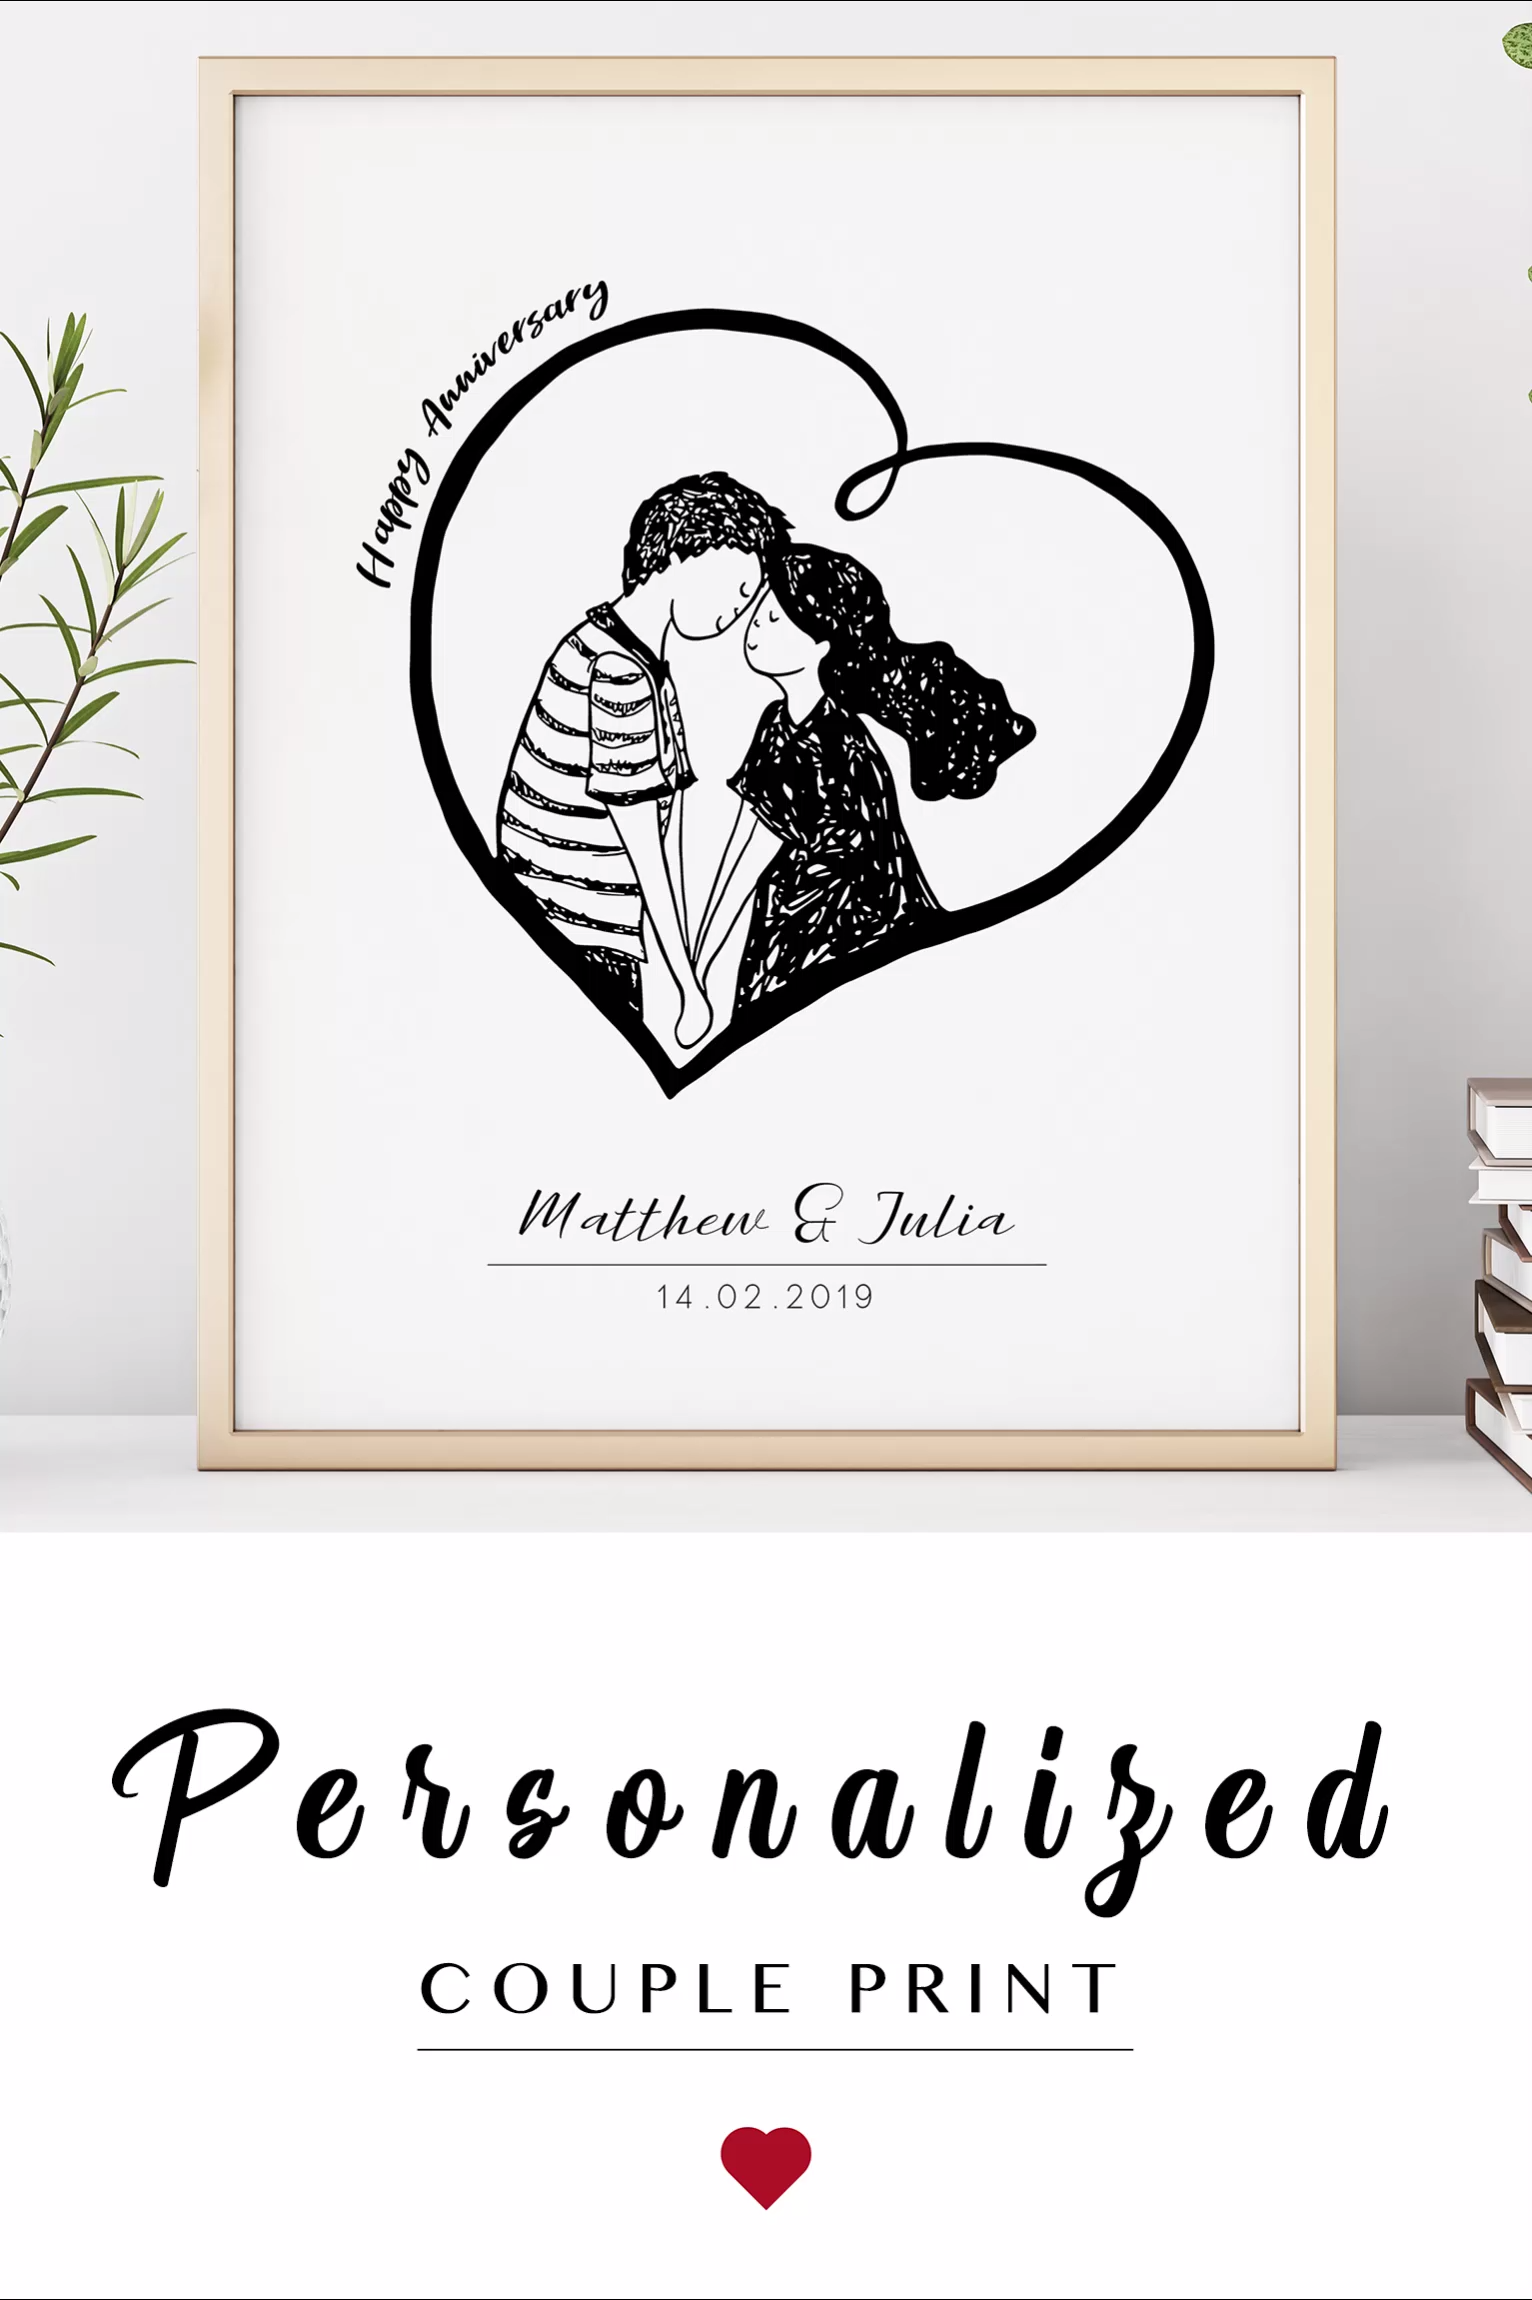 Personalized Wedding Anniversary Gift for Couple / Personalized Anniversary Print / Anniversary Gift -   17 diy projects For Couples friends ideas